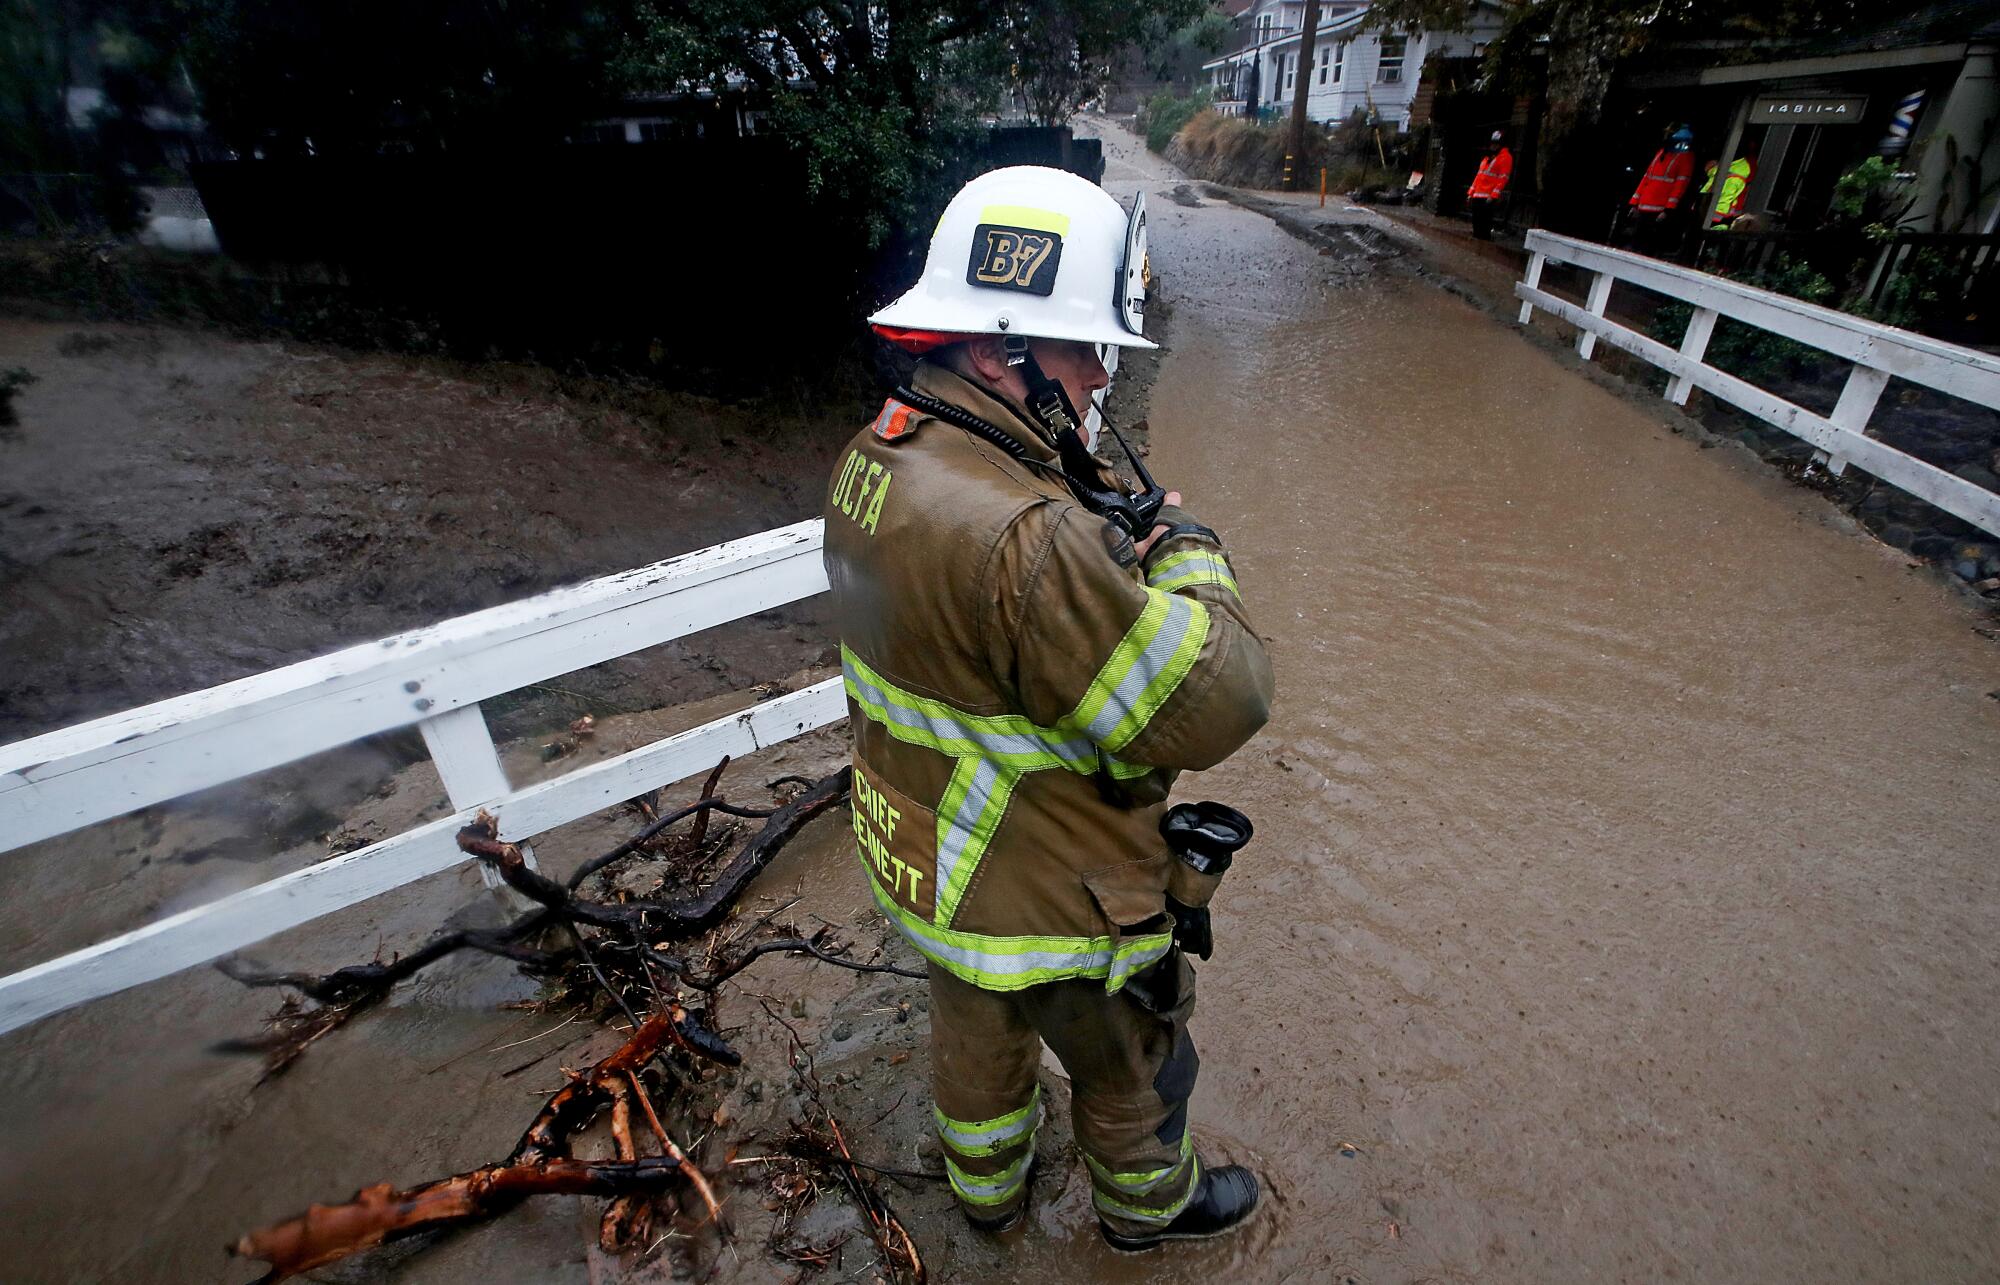 A fire official in protective gear watches muddy water flow past